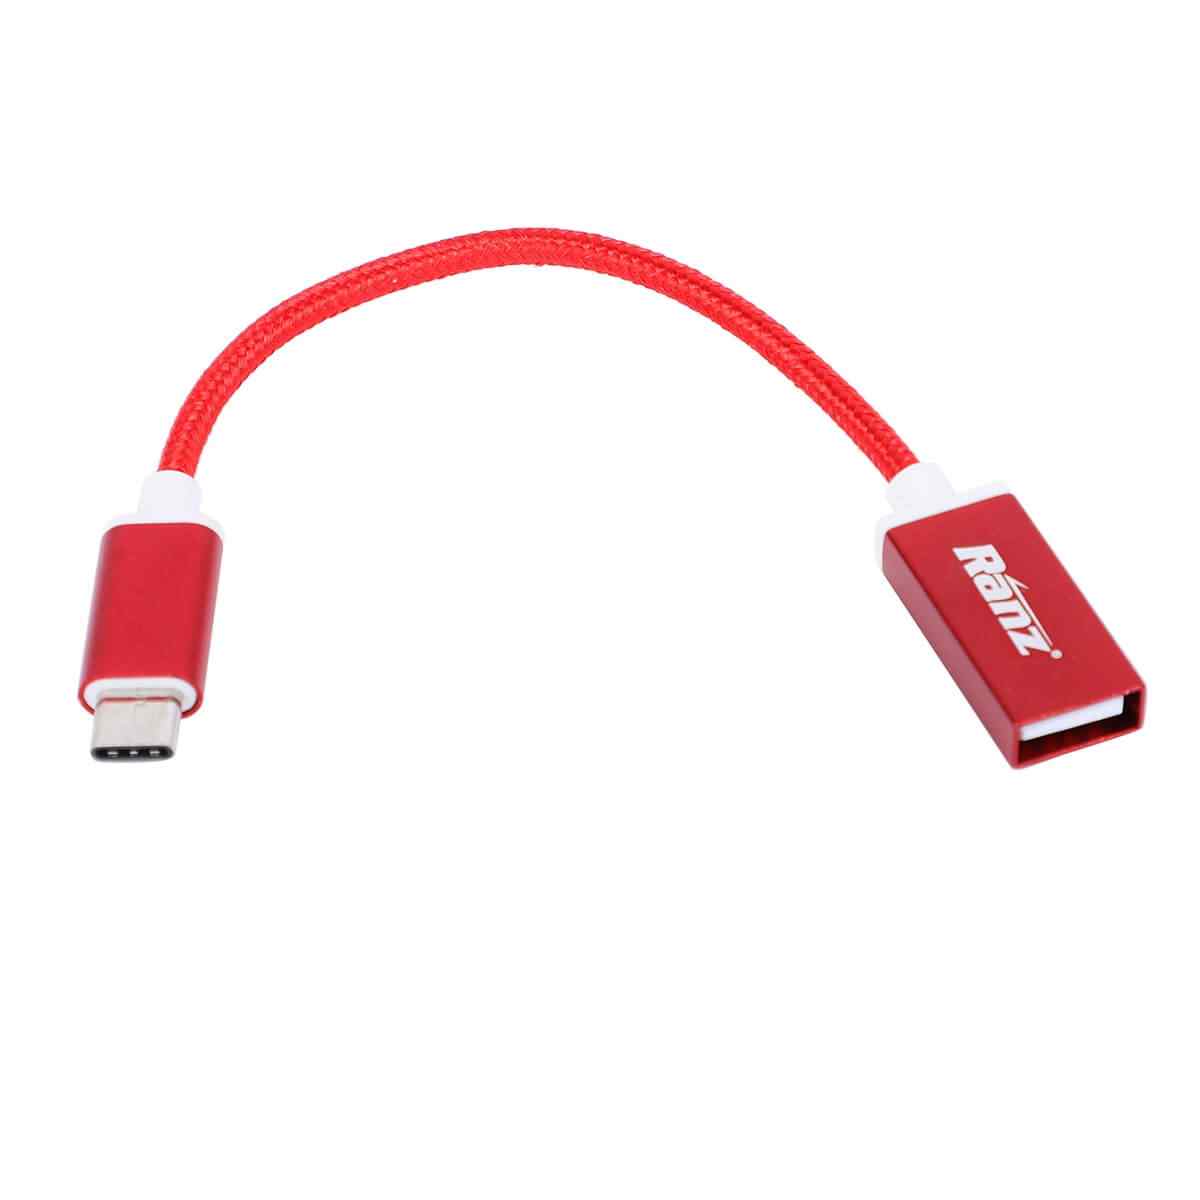 RANZ OTG CABLE (TYPE C TO USB)